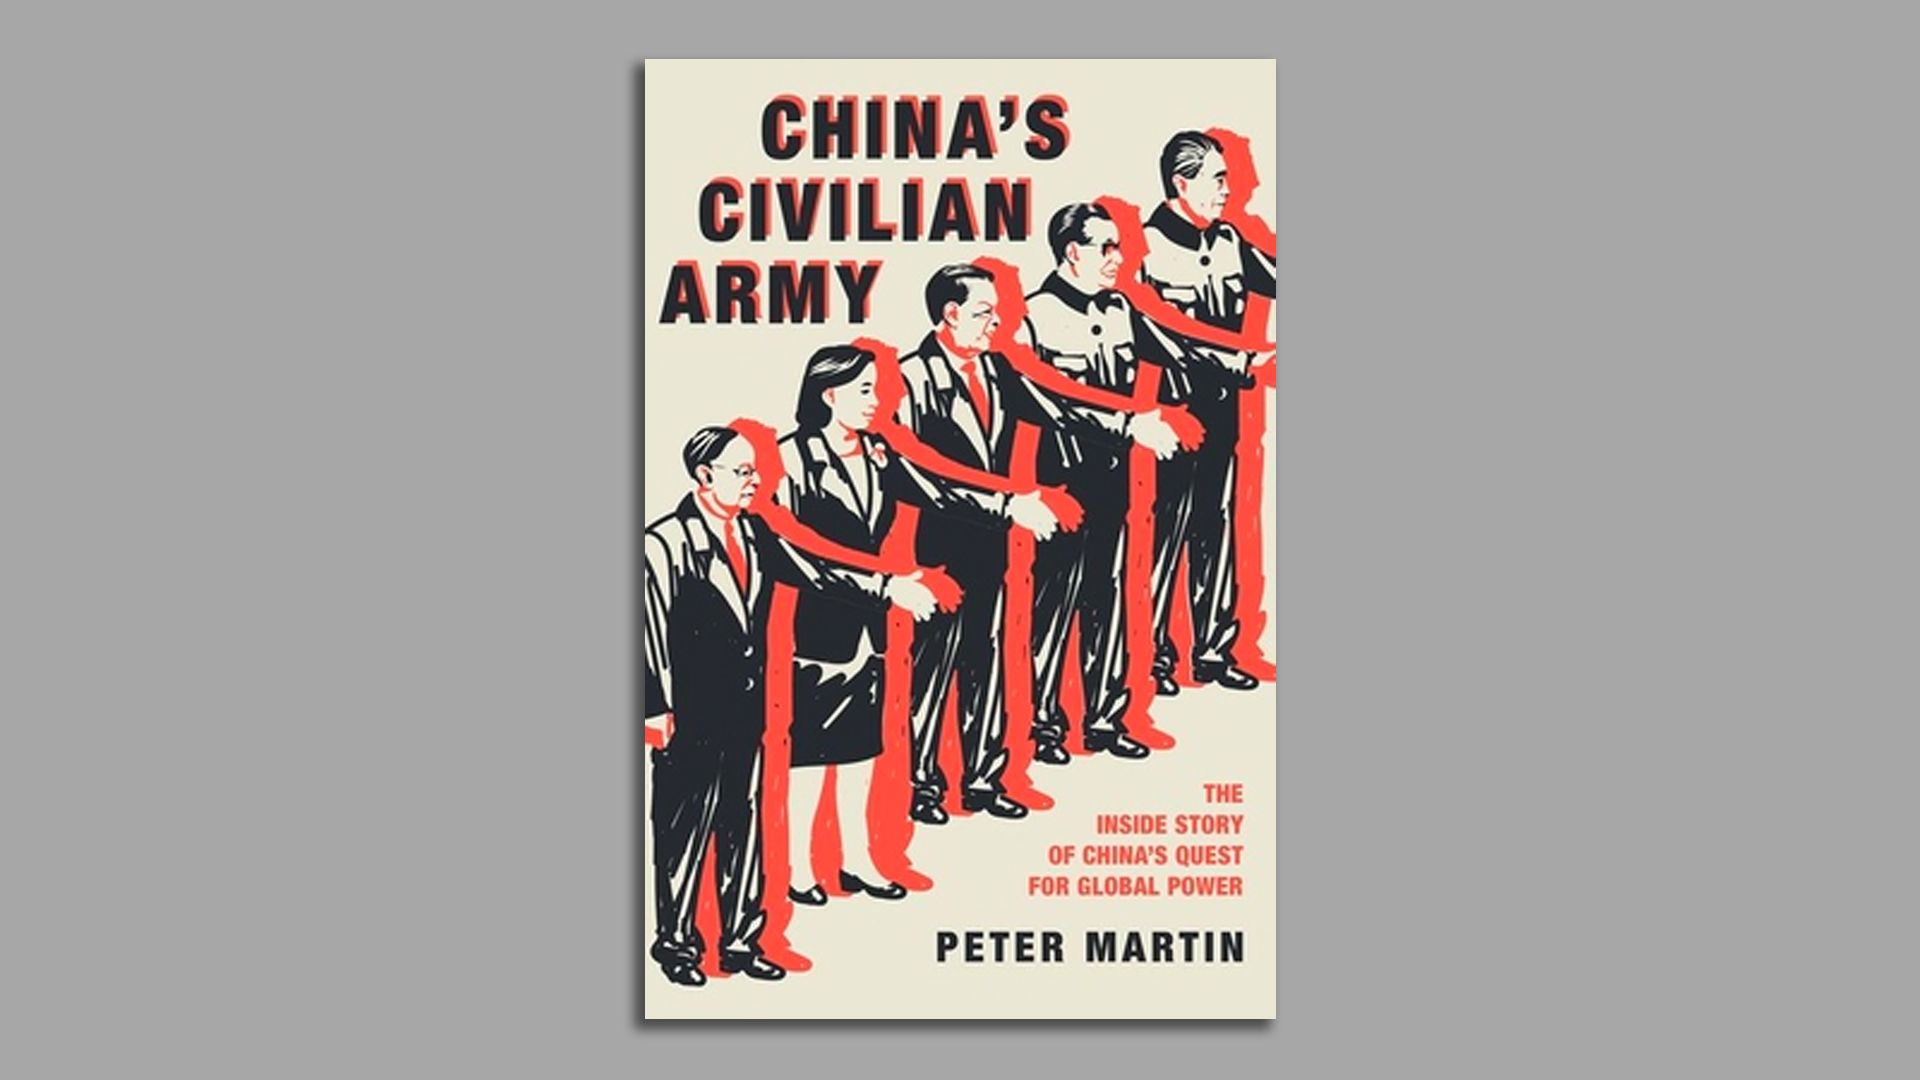 The book cover of China's Civilian Army by Peter Martin